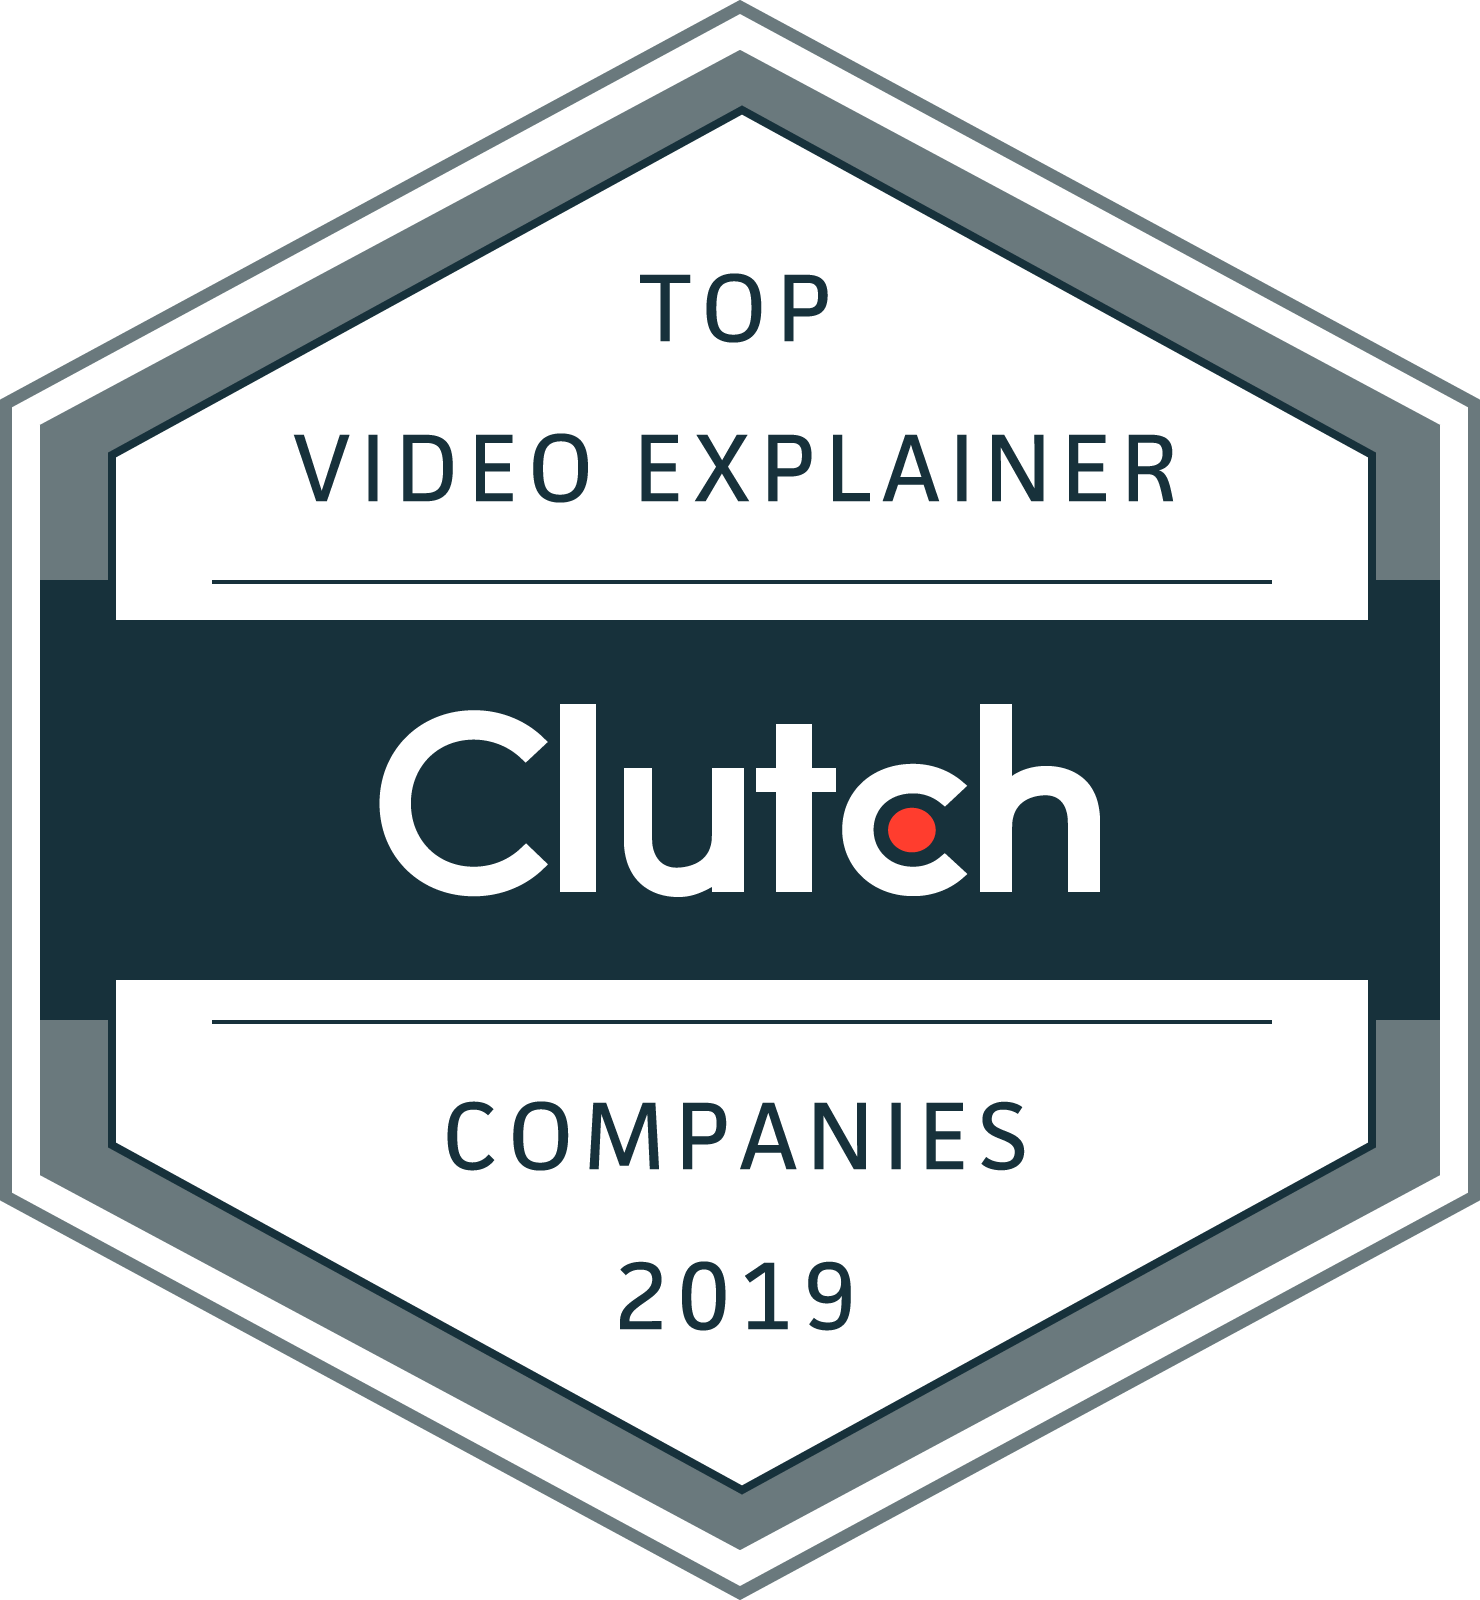 Top video explainer company on Clutch 